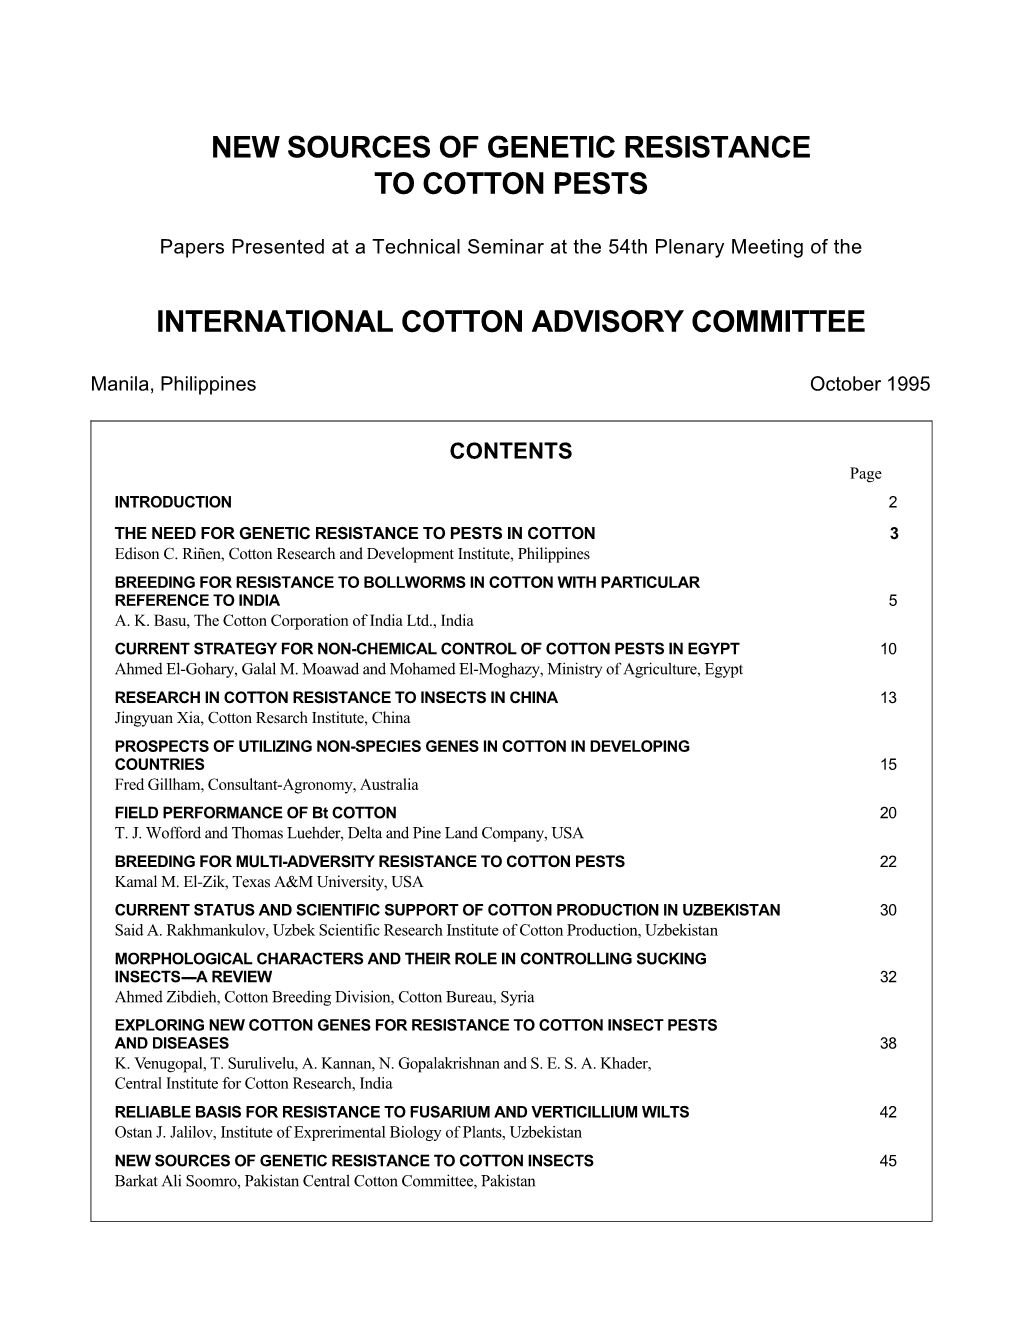 New Sources of Genetic Resistance to Cotton Pests